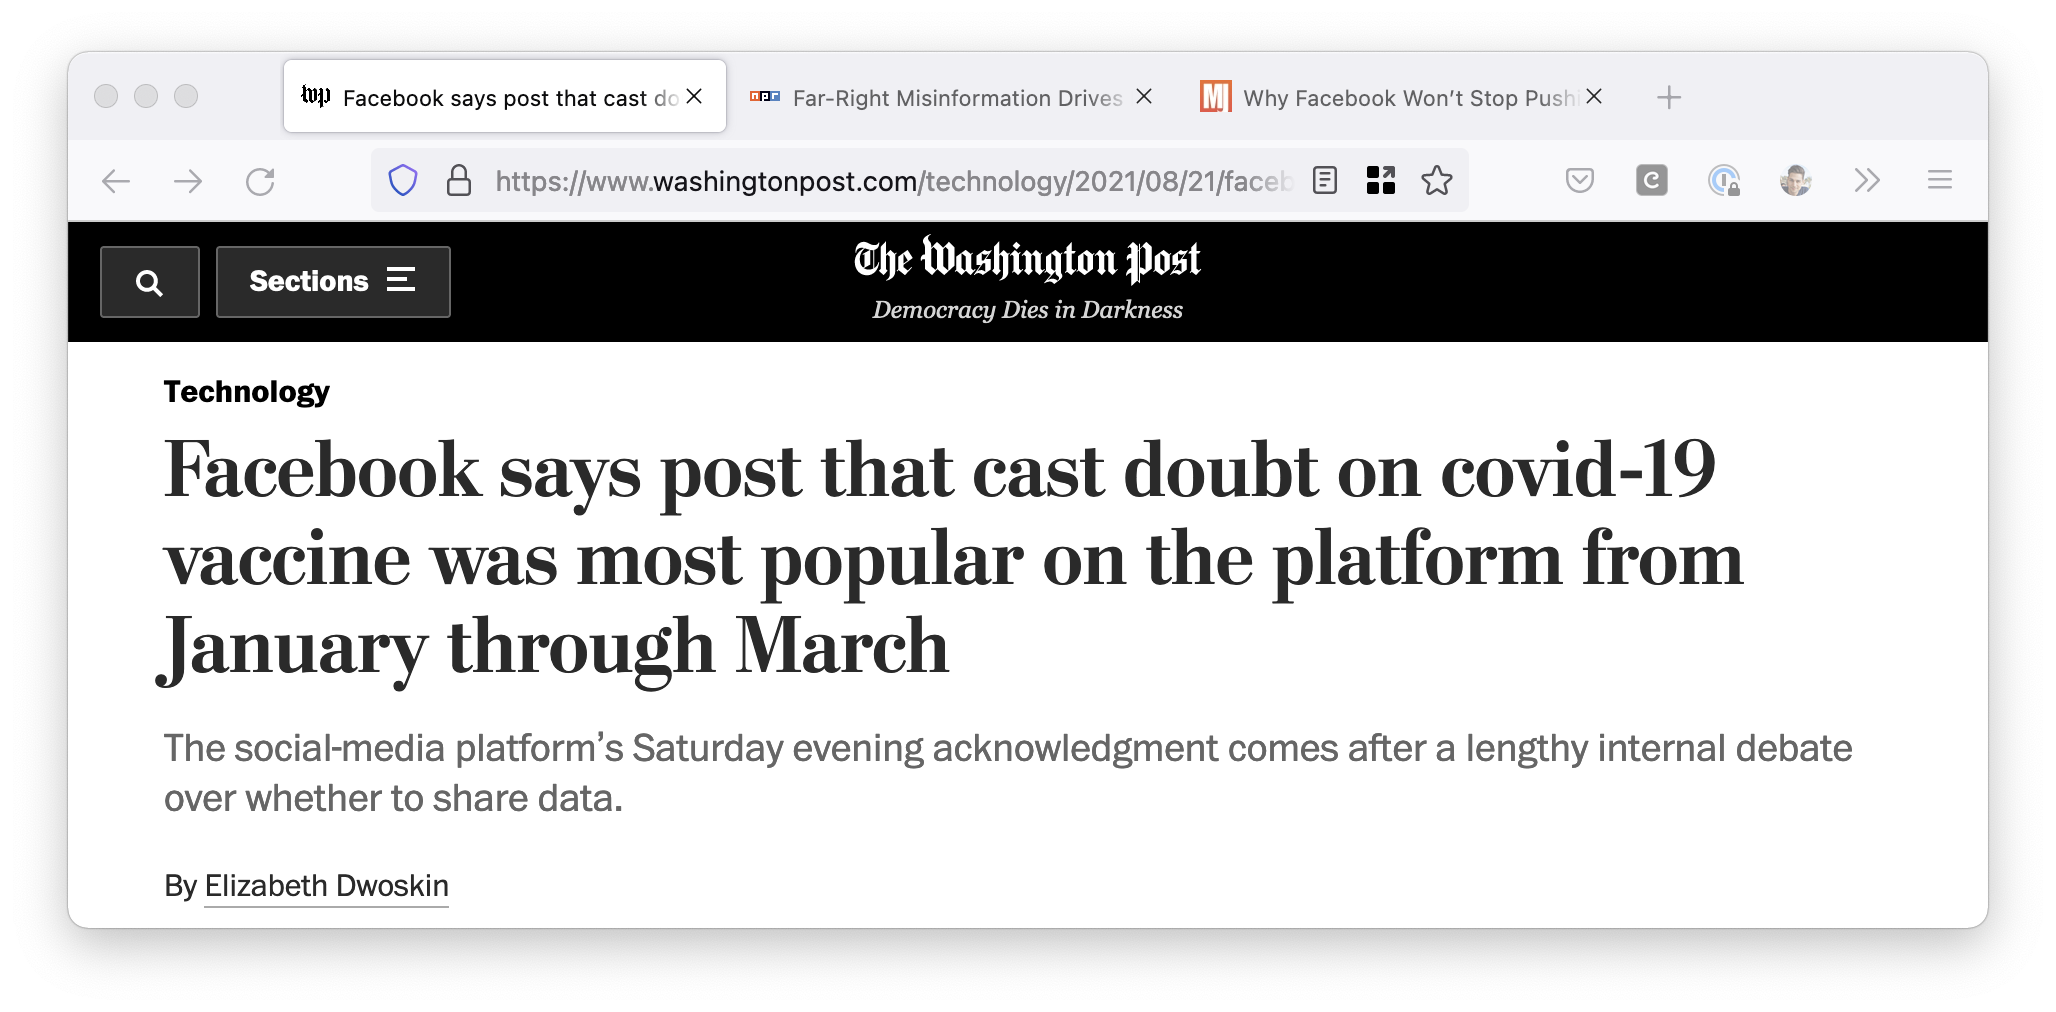 Screenshot of Washington Post. Headline: Facebook says post that cast doubt on covid-19 vaccine was most popular on the platform from January through March